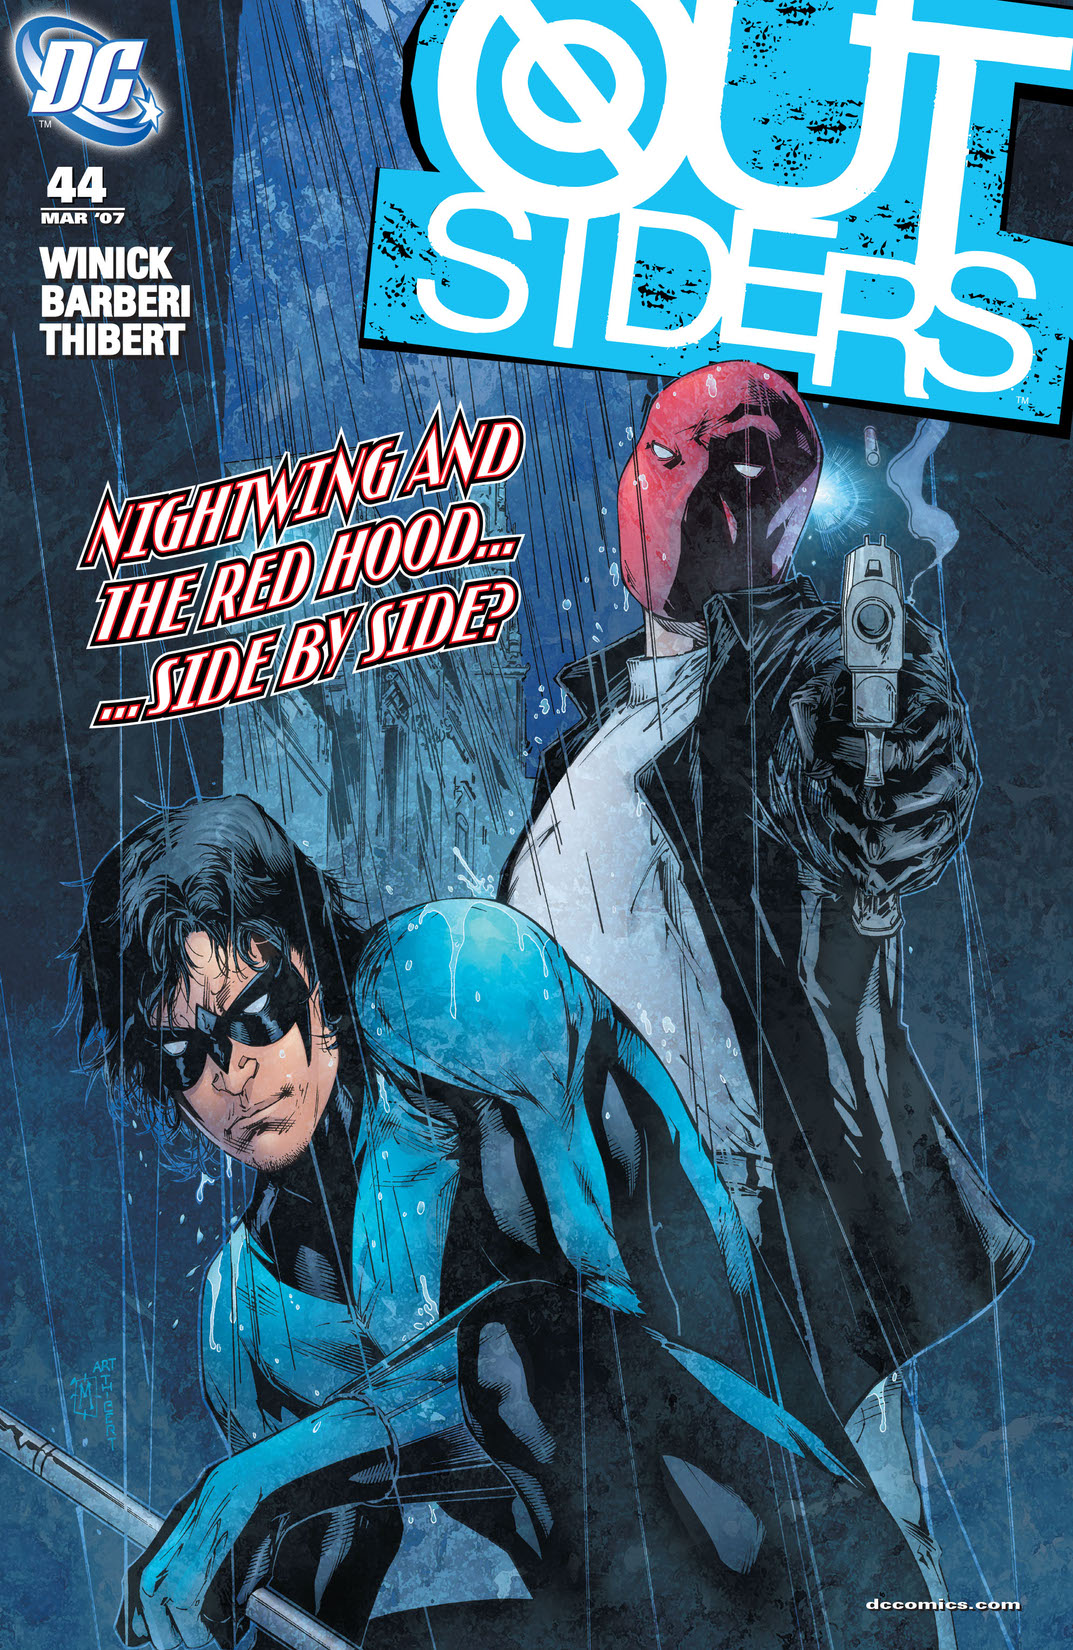 Outsiders (2003-) #44 preview images